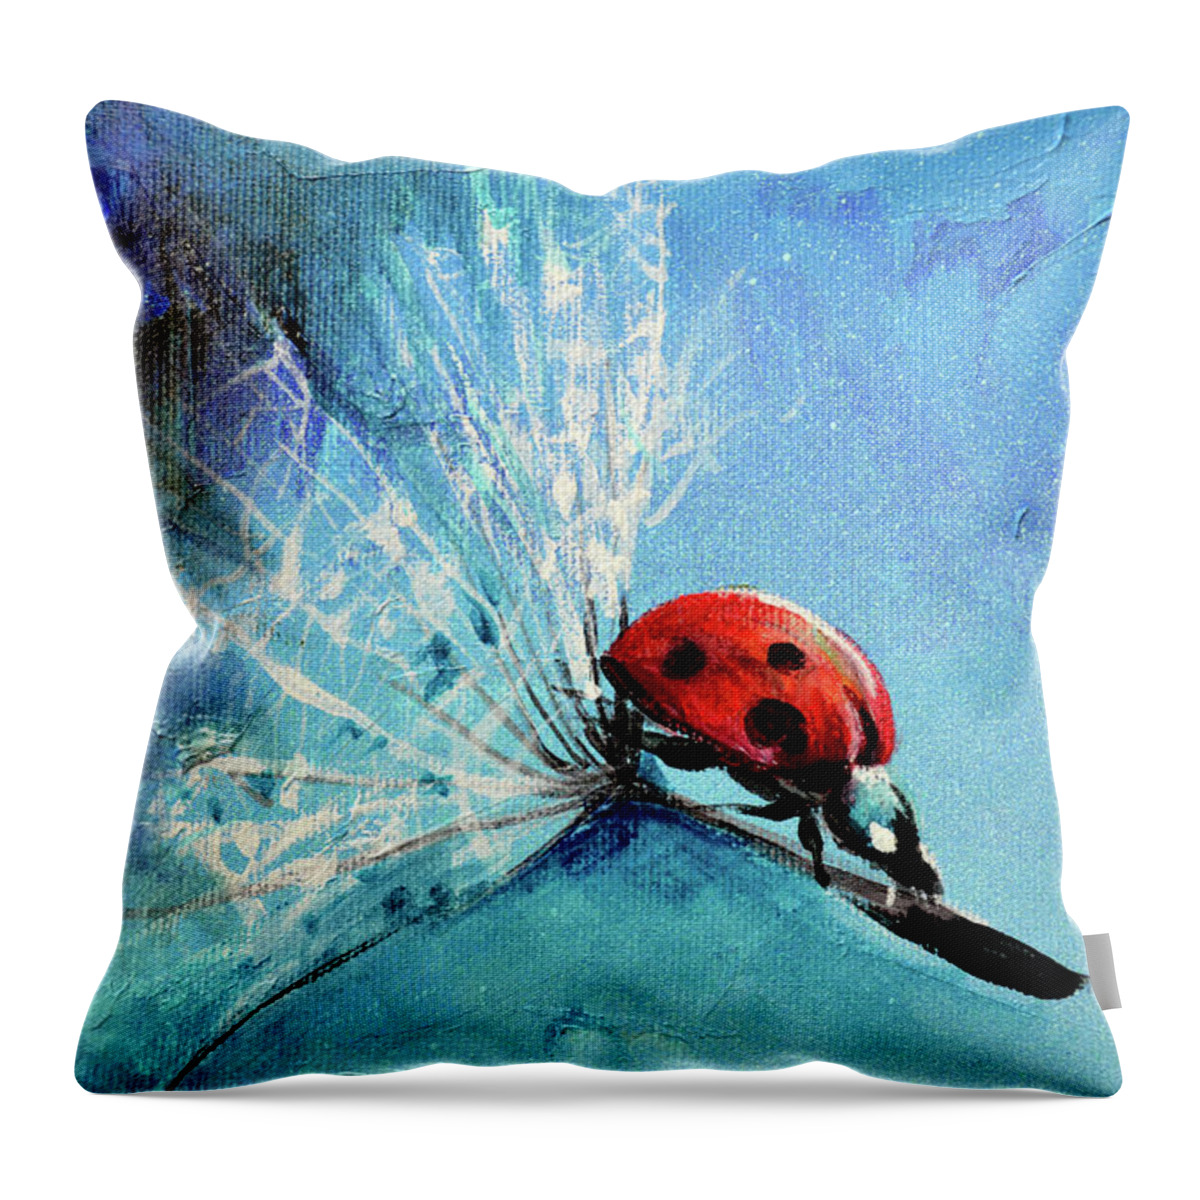 Ladybug Throw Pillow featuring the painting FLIRT - Ladybug on Dandelion Seed Painting by Soos Roxana Gabriela Art Print by Soos Roxana Gabriela